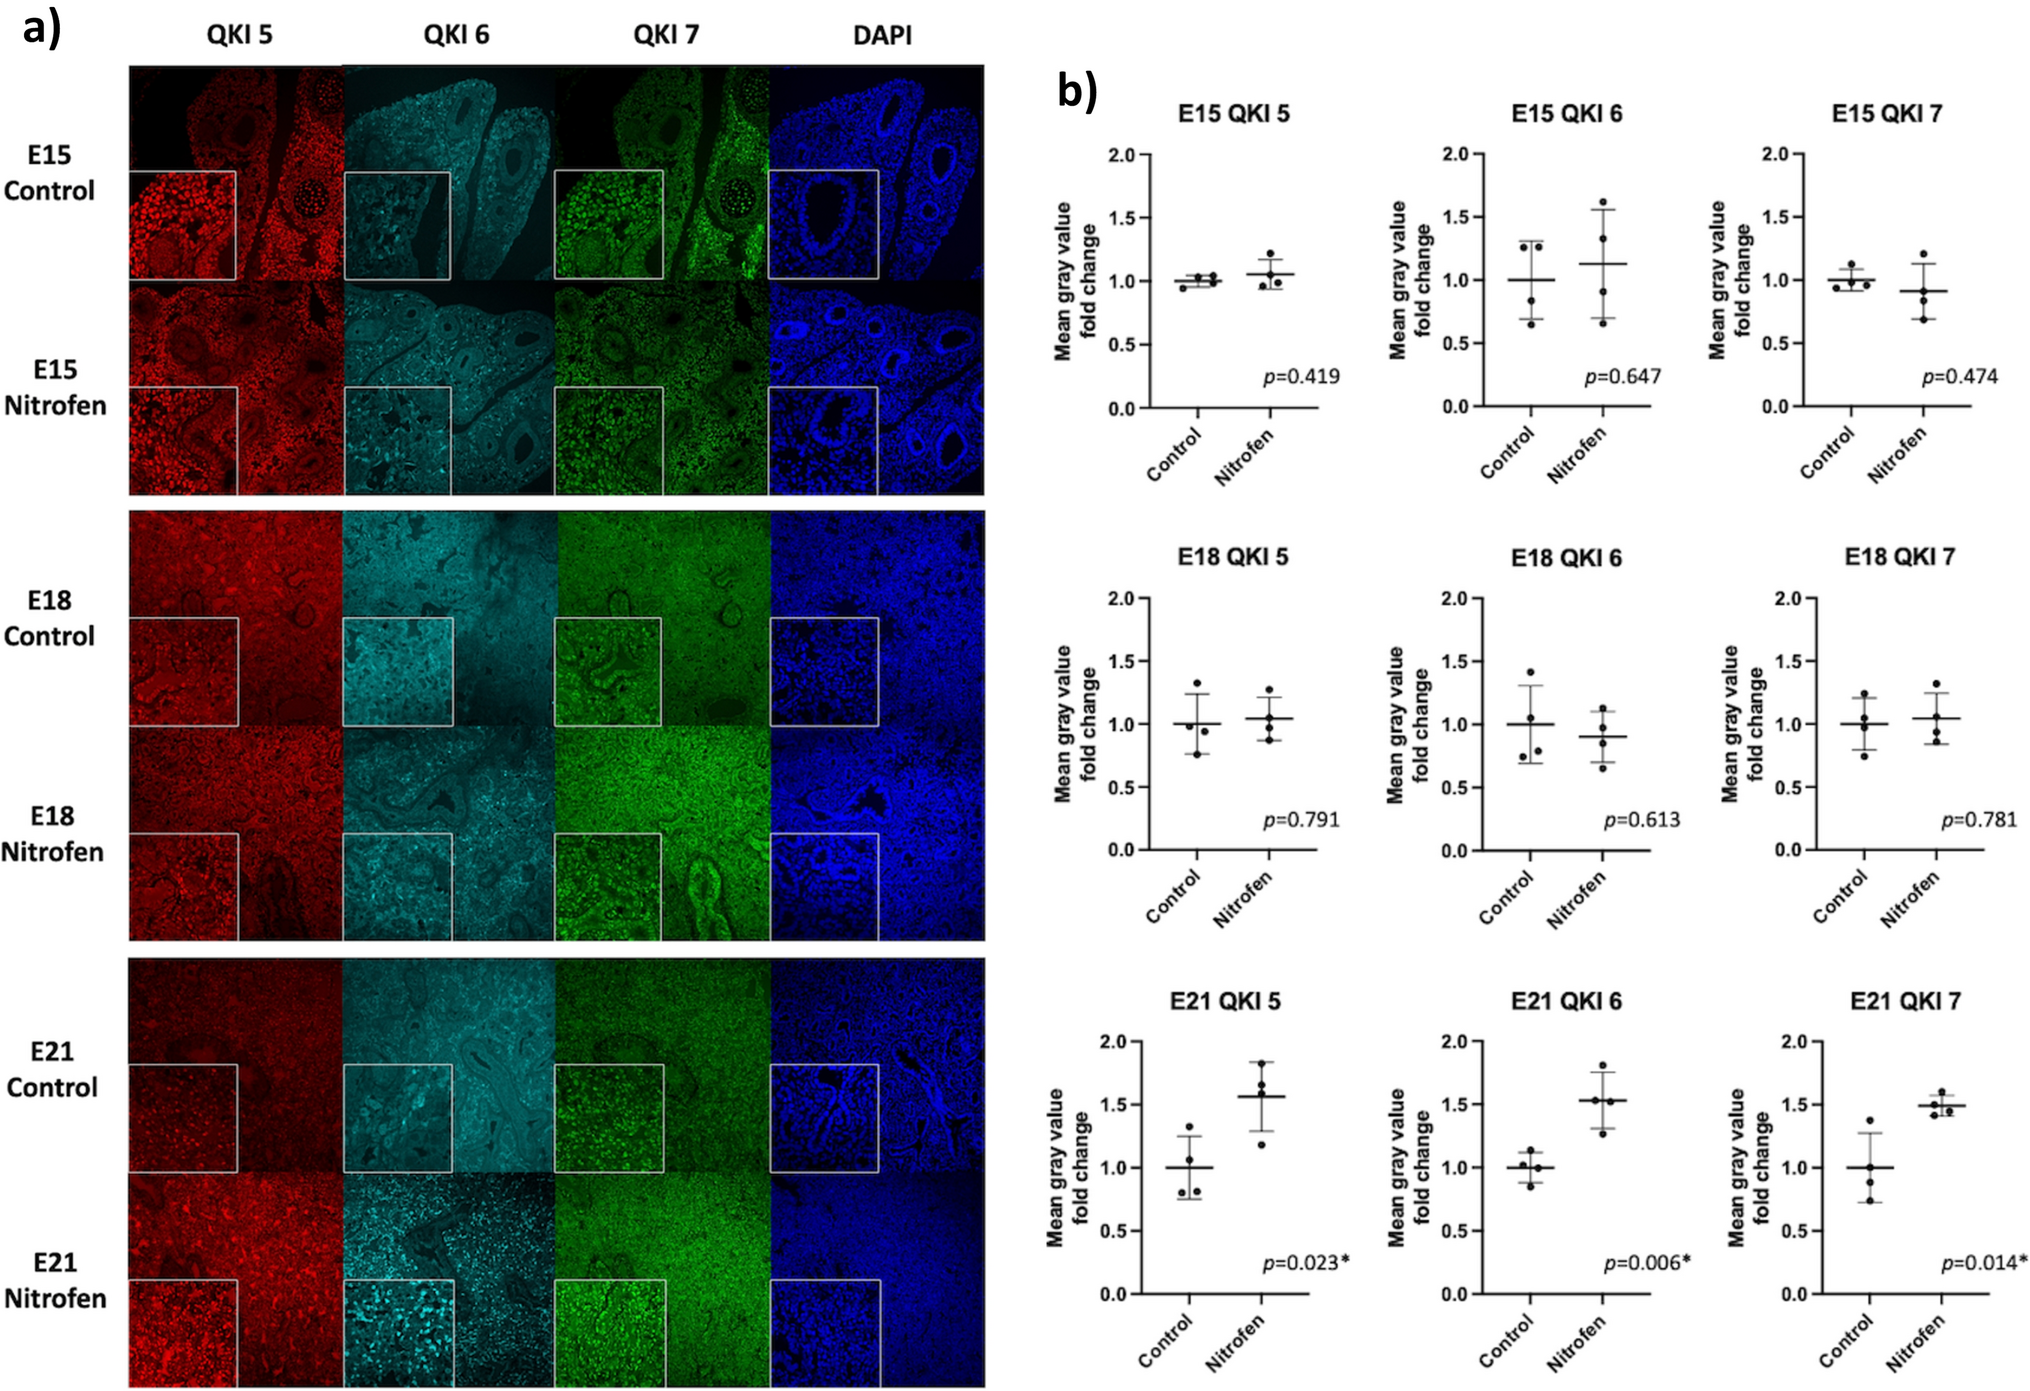 The RNA-binding protein quaking is upregulated in nitrofen-induced congenital diaphragmatic hernia lungs at the end of gestation